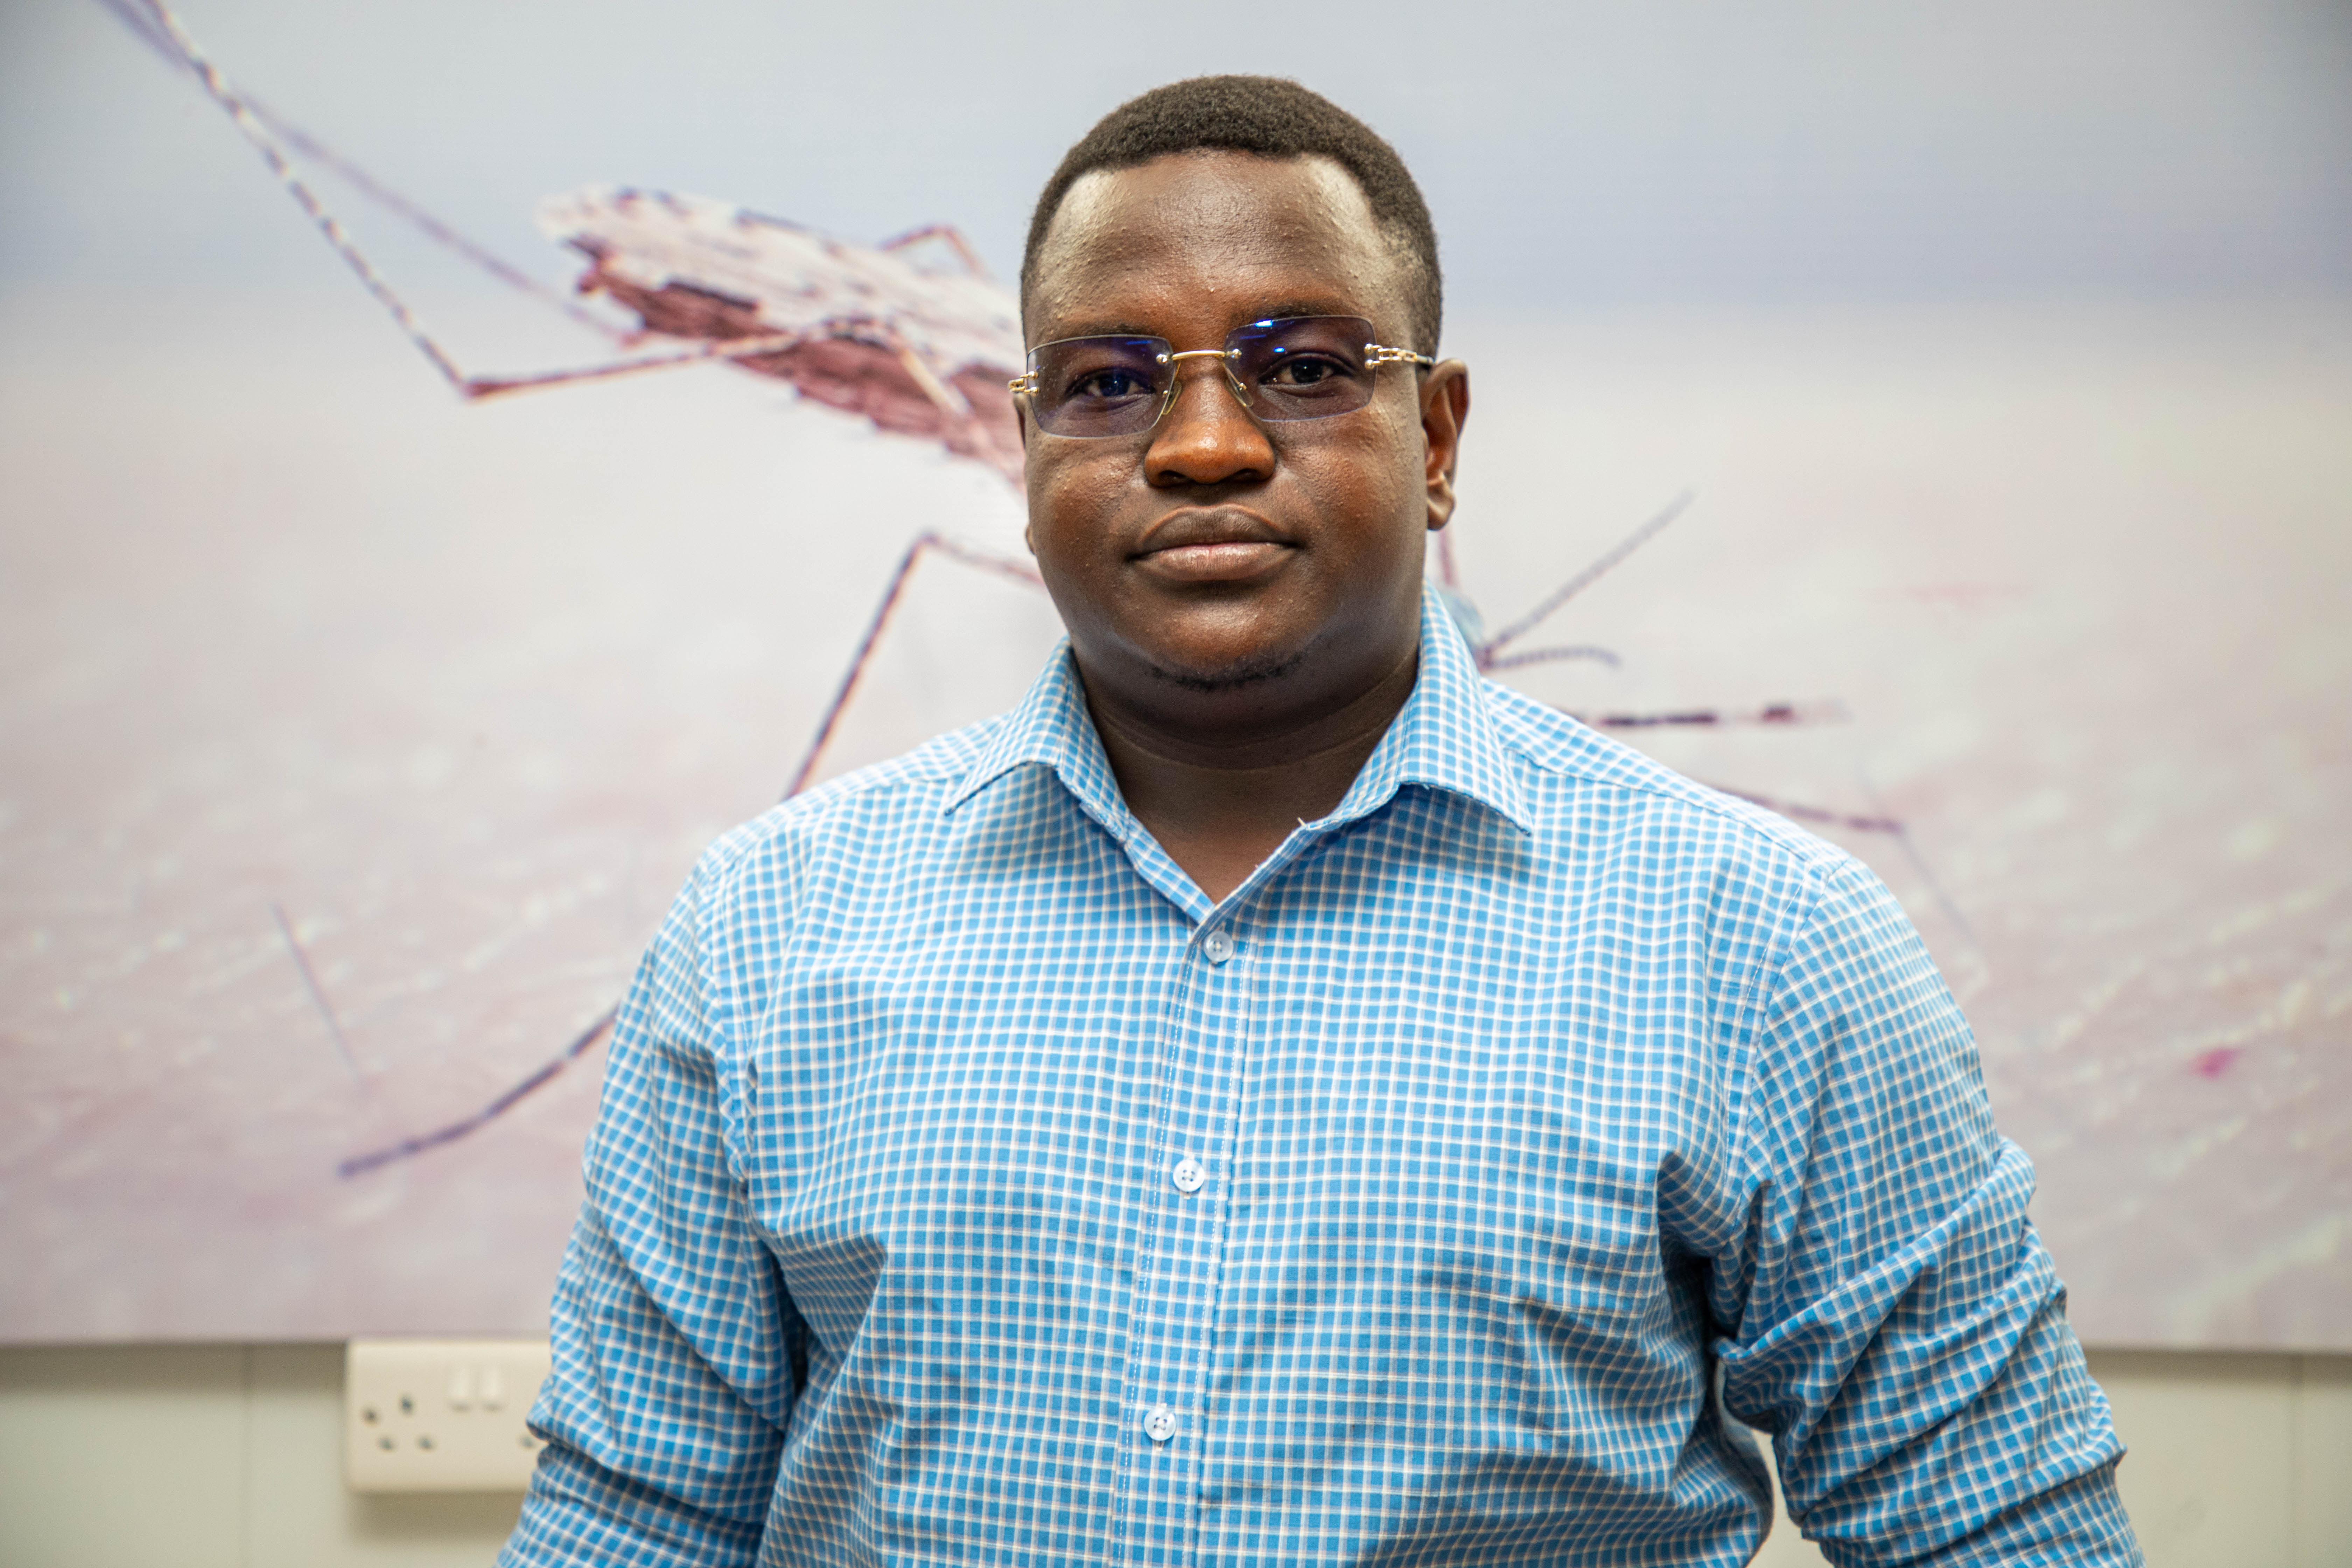 EXCELLENCE:  Ifakara scientist wins Young Investigator Award in Chicago